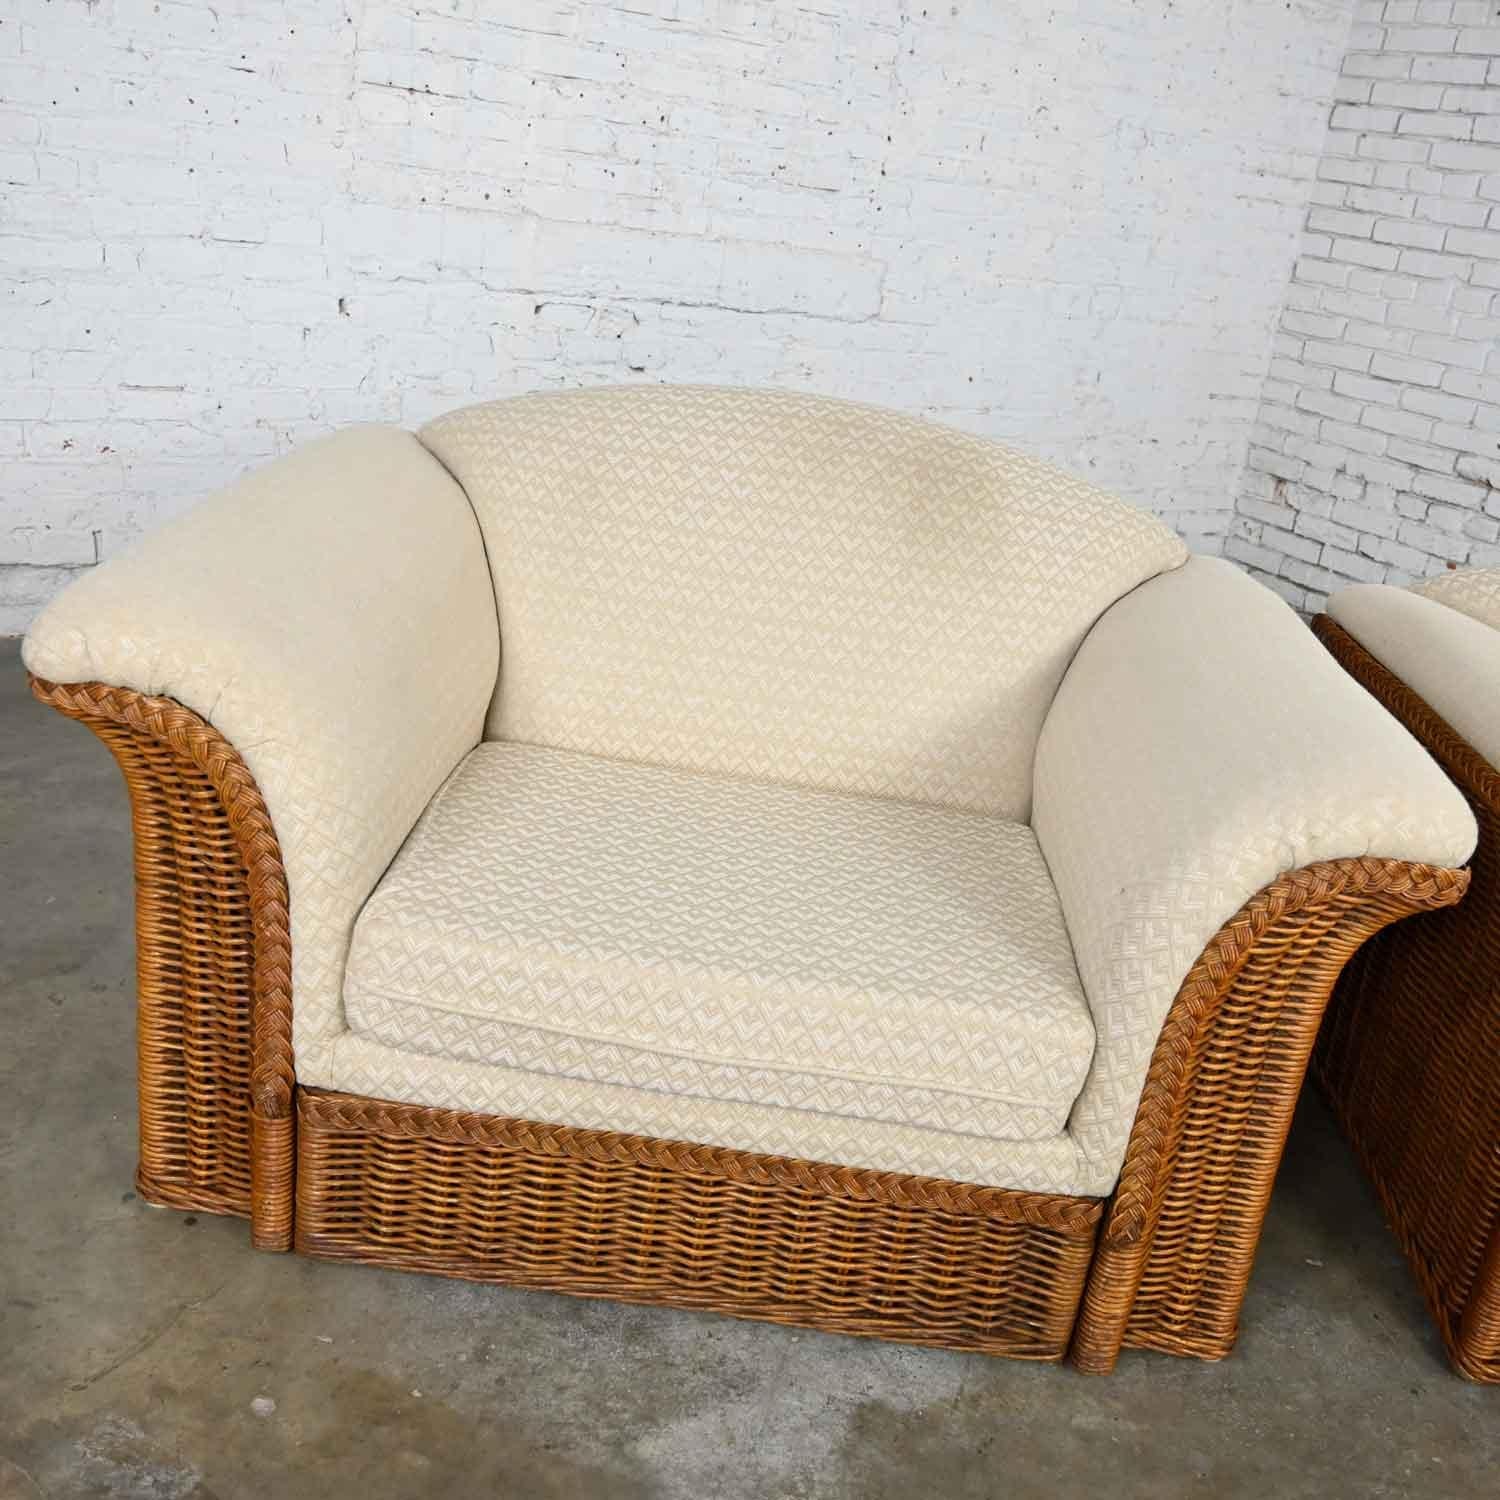 Rattan Wicker Pair of Oversized Lounge Chairs Manner of Michael Taylor For Sale 5